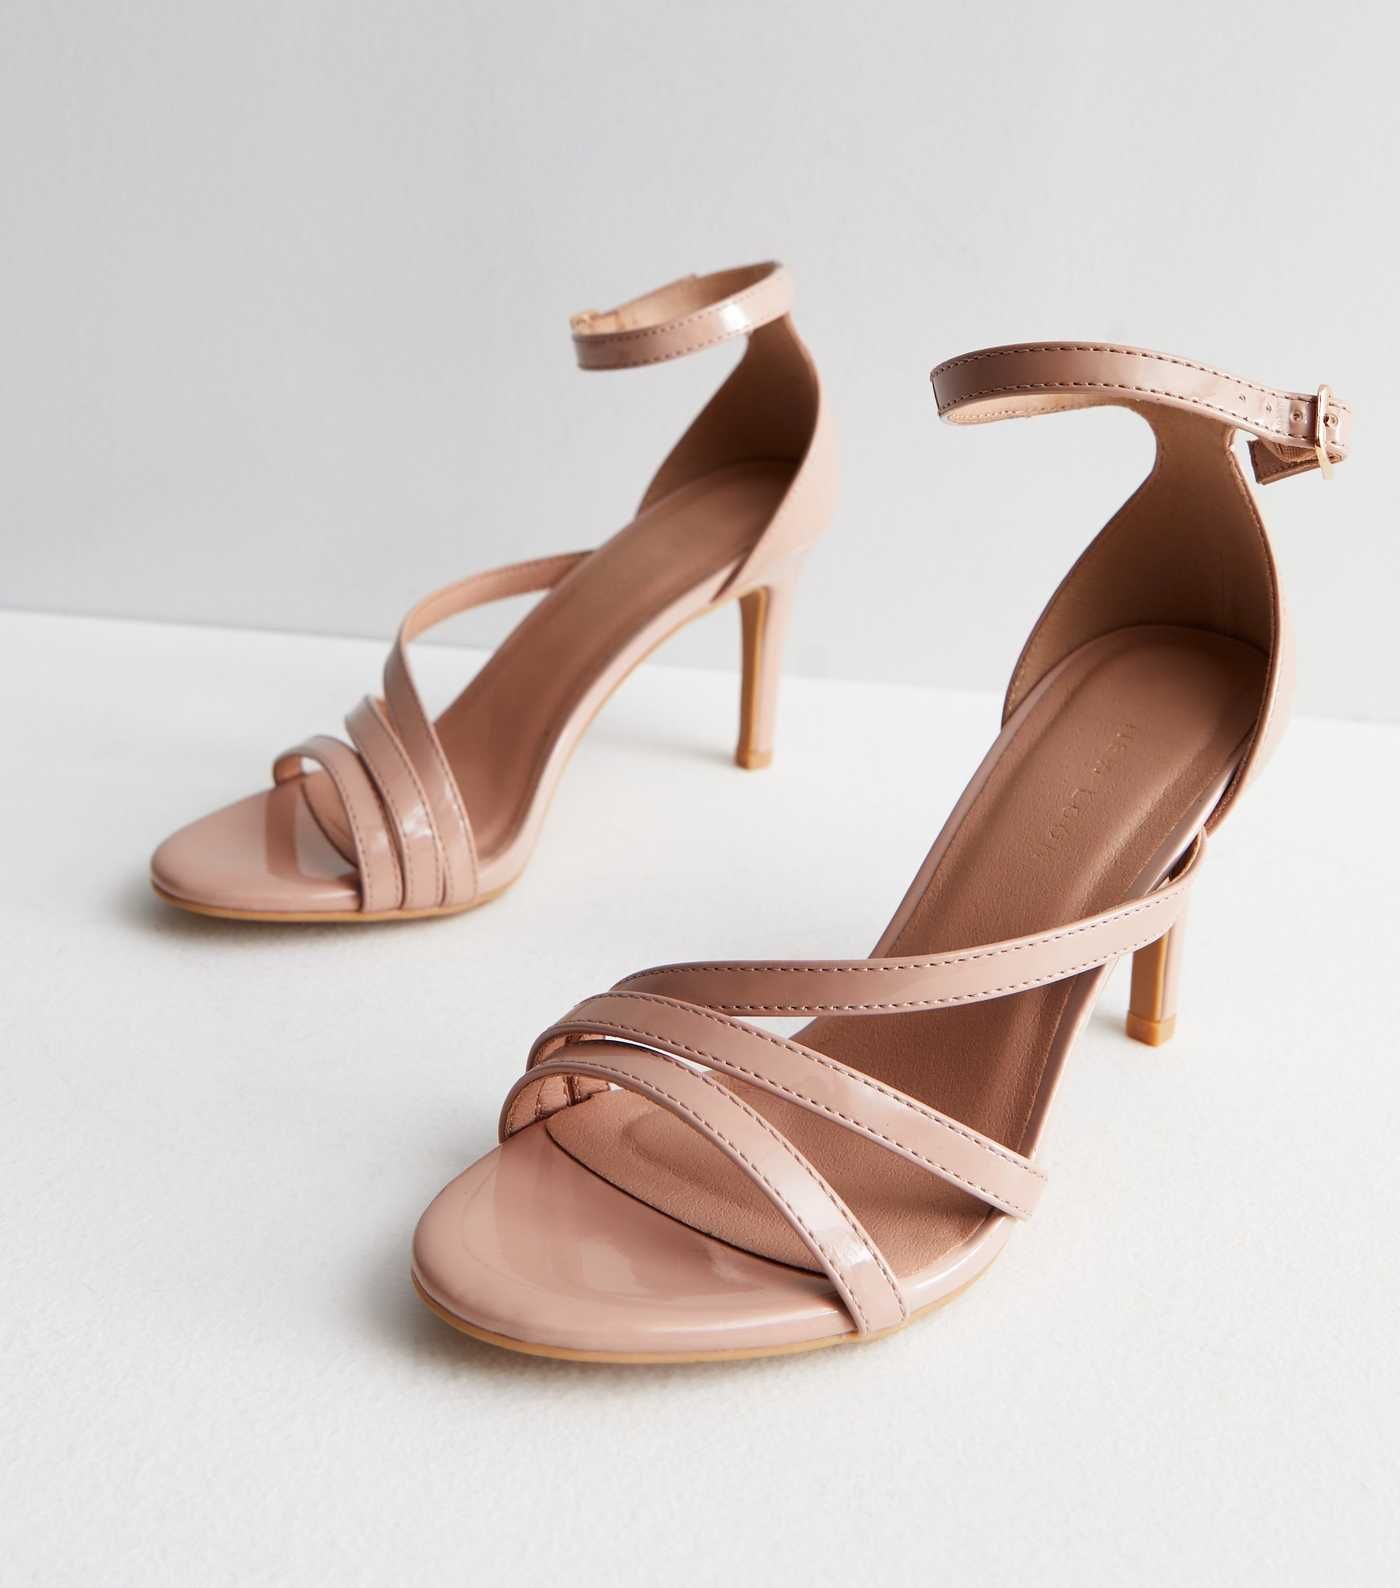 Pale Pink Patent Strappy Stiletto Heel Sandals
						
						Add to Saved Items
						Remove from ... | New Look (UK)